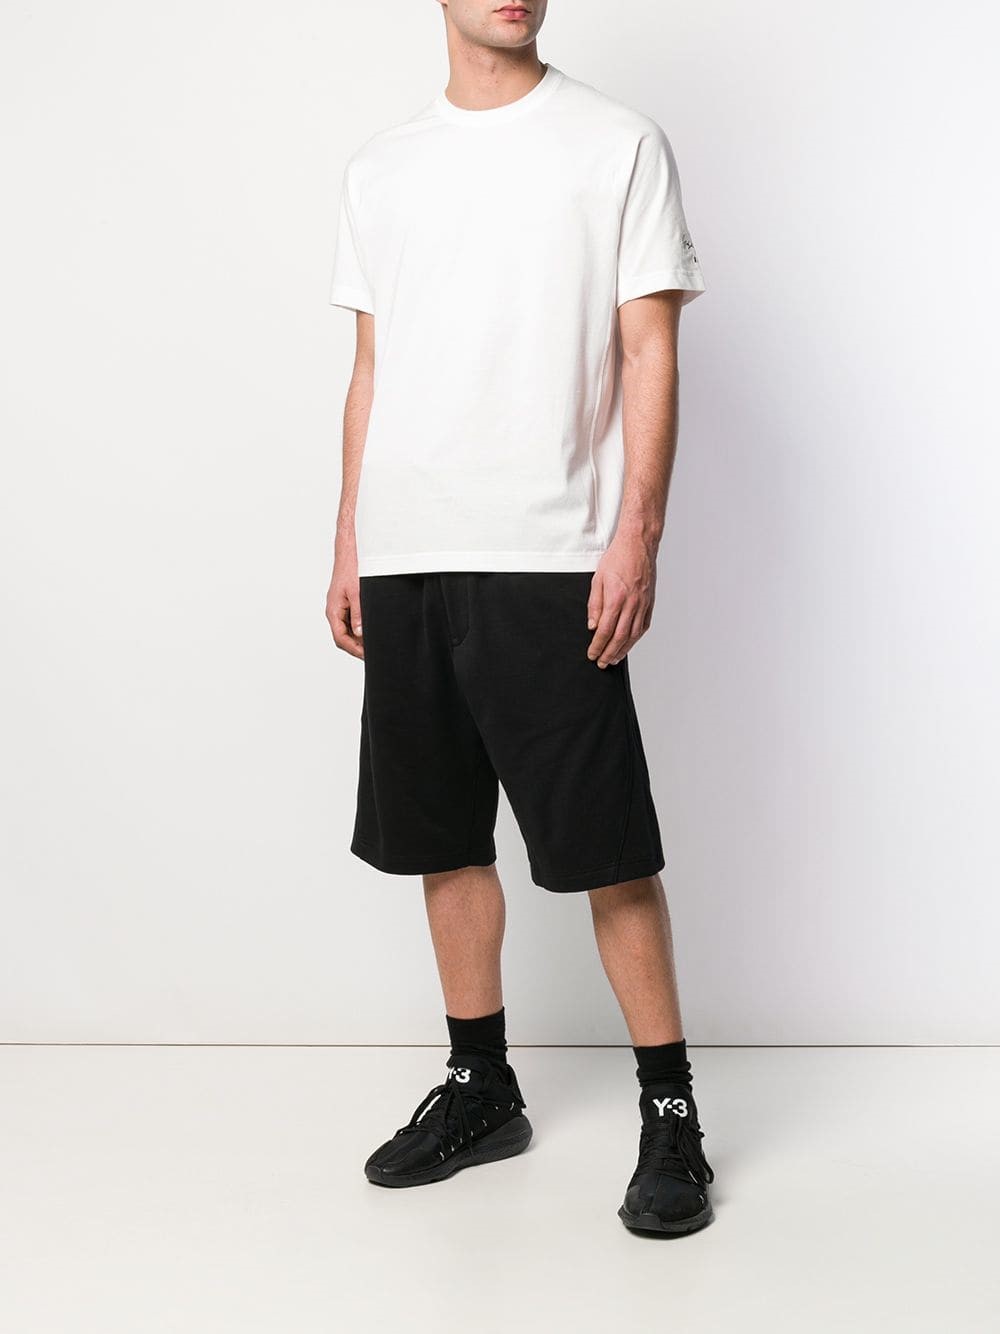 y-3 T-SHIRT available on montiboutique.com - 27136